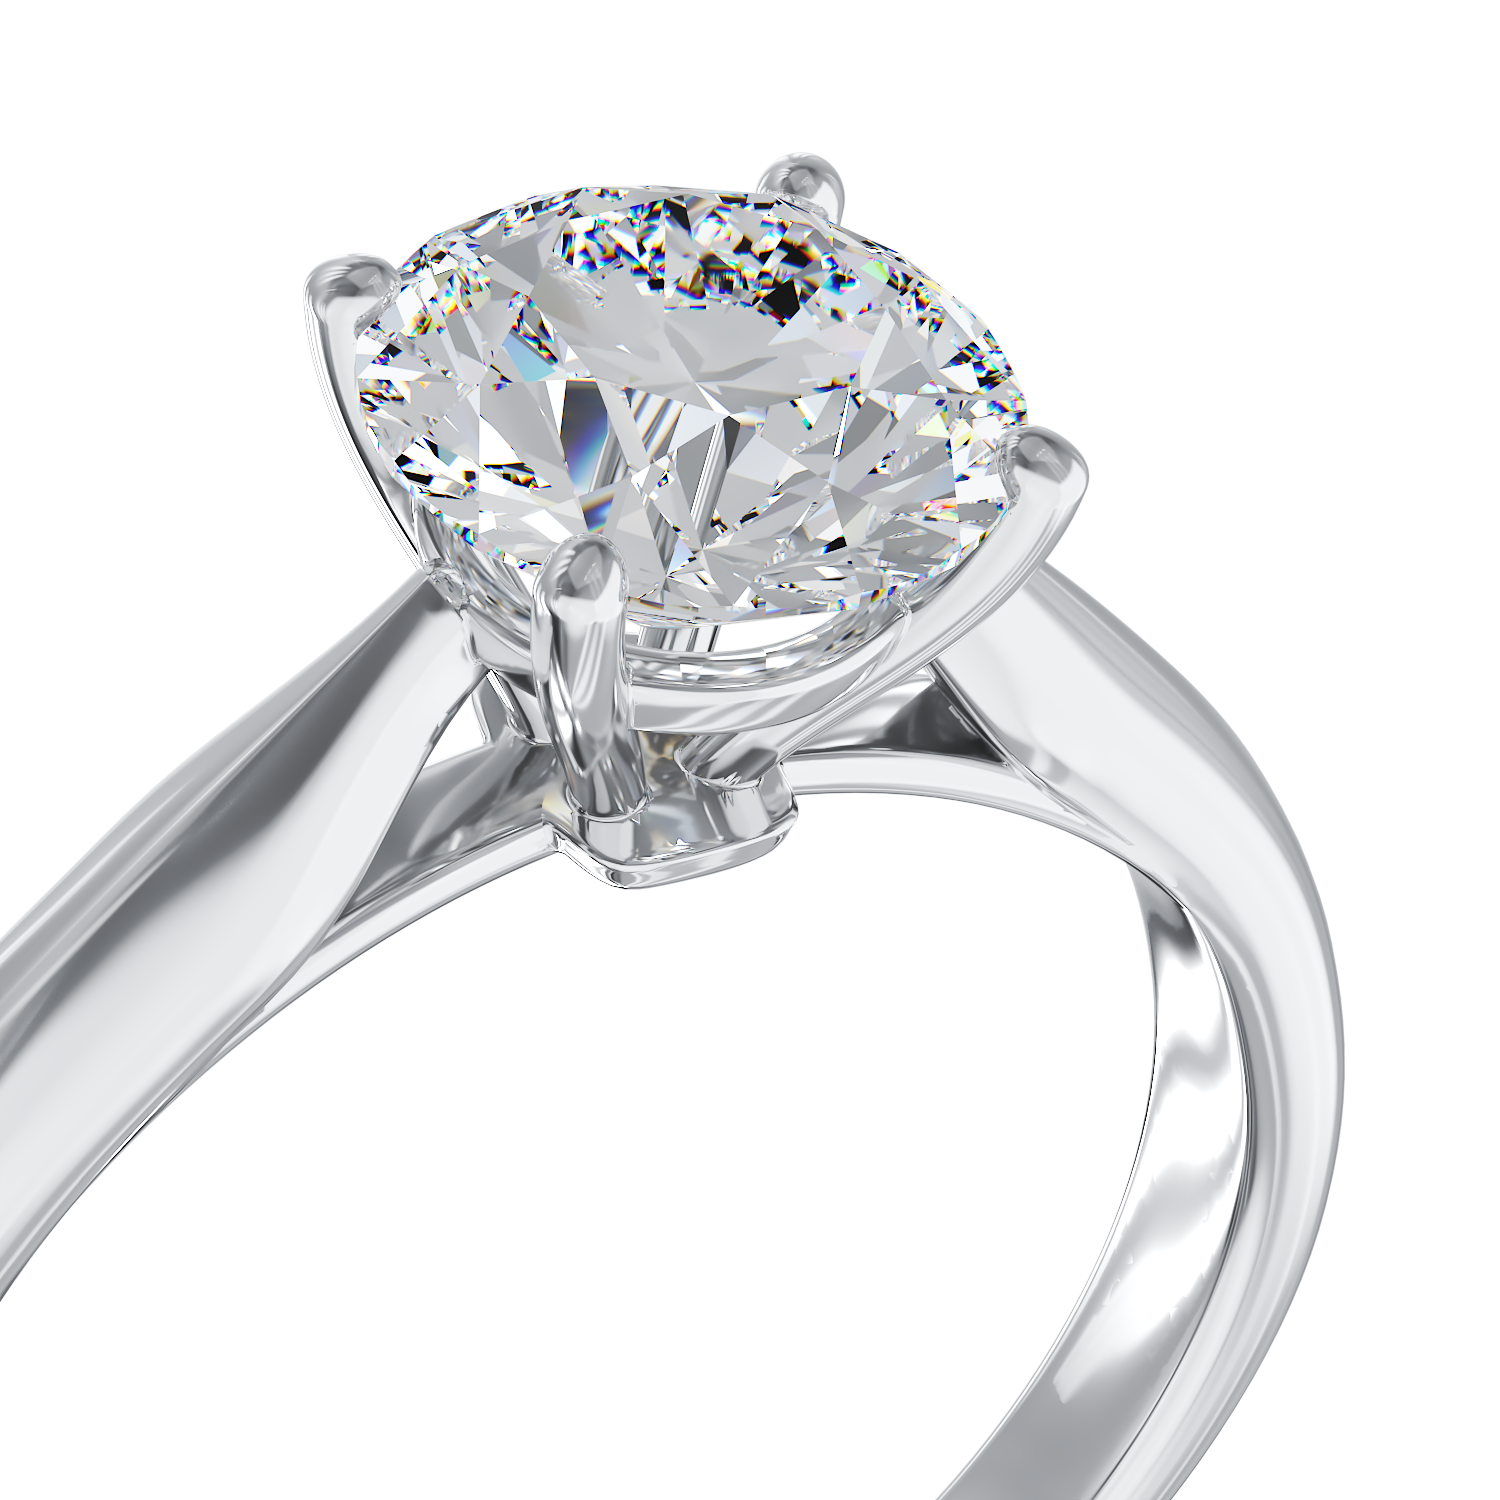 18K white gold engagement ring with a 0.9ct solitaire diamond